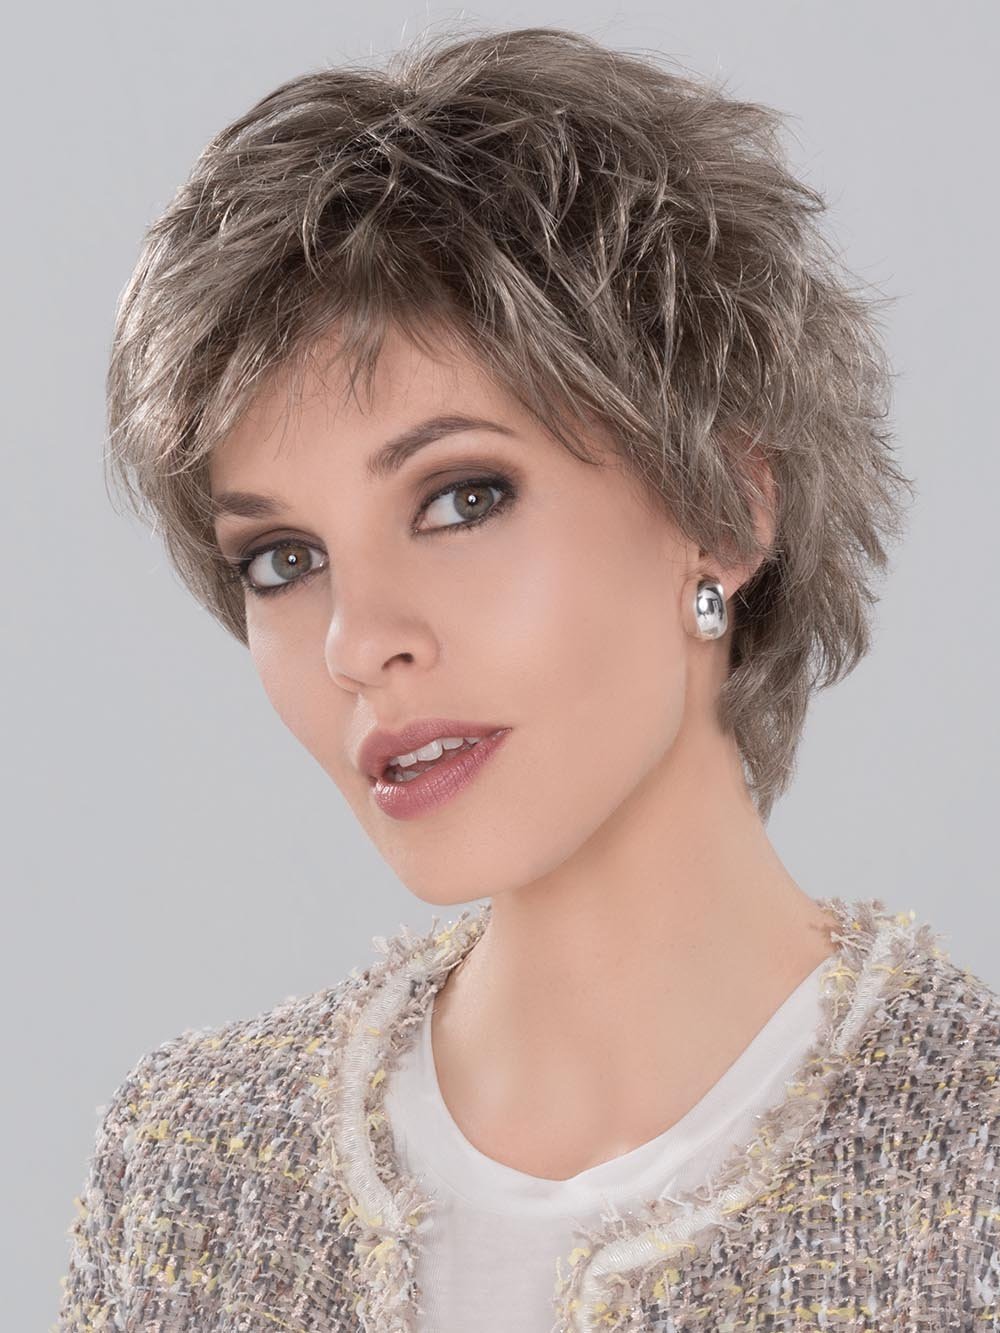 ravel Mono has a Monofilament Crown and Lace Front for the more natural look and appeal as your own biological hair